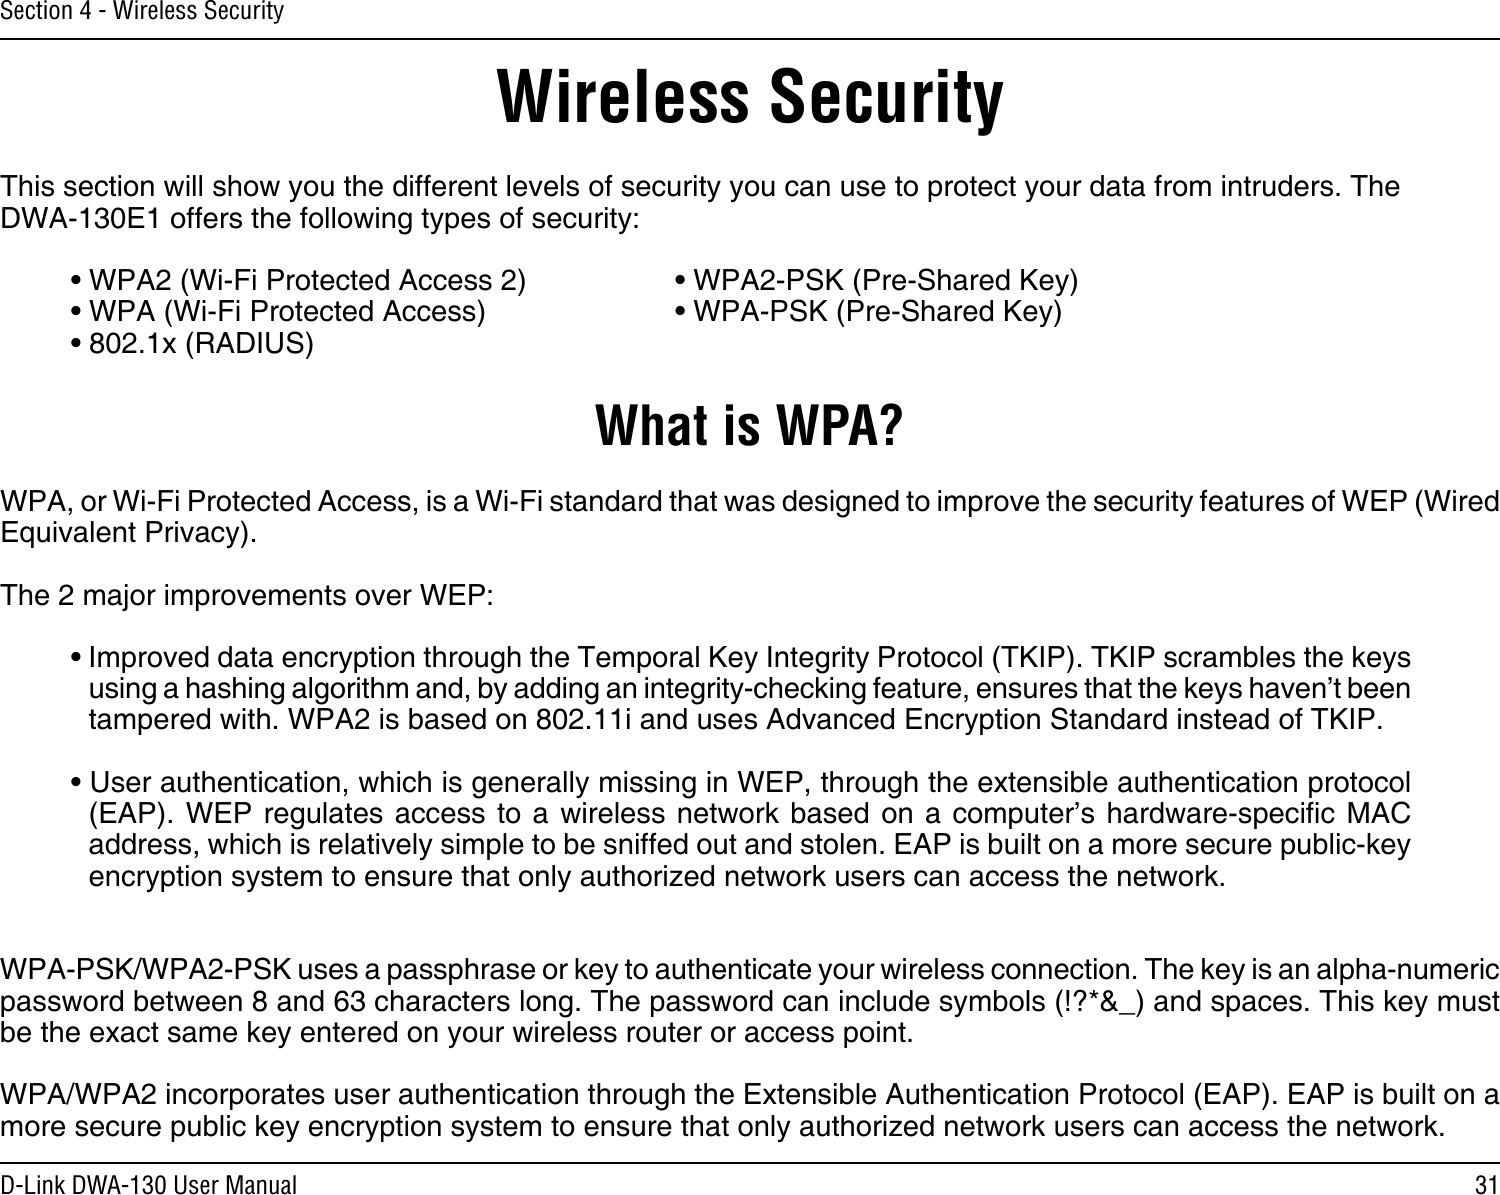 31D-Link DWA-130 User ManualSection 4 - Wireless SecurityWireless SecurityThis section will show you the different levels of security you can use to protect your data from intruders. The DWA-130E1 offers the following types of security:• WPA2 (Wi-Fi Protected Access 2)     • WPA2-PSK (Pre-Shared Key)• WPA (Wi-Fi Protected Access)      • WPA-PSK (Pre-Shared Key)• 802.1x (RADIUS)What is WPA?WPA, or Wi-Fi Protected Access, is a Wi-Fi standard that was designed to improve the security features of WEP (Wired Equivalent Privacy).  The 2 major improvements over WEP: • Improved data encryption through the Temporal Key Integrity Protocol (TKIP). TKIP scrambles the keys using a hashing algorithm and, by adding an integrity-checking feature, ensures that the keys haven’t been tampered with. WPA2 is based on 802.11i and uses Advanced Encryption Standard instead of TKIP.• User authentication, which is generally missing in WEP, through the extensible authentication protocol (EAP). WEP  regulates access  to a  wireless network  based on a  computer’s hardware-specic  MAC address, which is relatively simple to be sniffed out and stolen. EAP is built on a more secure public-key encryption system to ensure that only authorized network users can access the network.WPA-PSK/WPA2-PSK uses a passphrase or key to authenticate your wireless connection. The key is an alpha-numeric password between 8 and 63 characters long. The password can include symbols (!?*&amp;_) and spaces. This key must be the exact same key entered on your wireless router or access point.WPA/WPA2 incorporates user authentication through the Extensible Authentication Protocol (EAP). EAP is built on a more secure public key encryption system to ensure that only authorized network users can access the network.